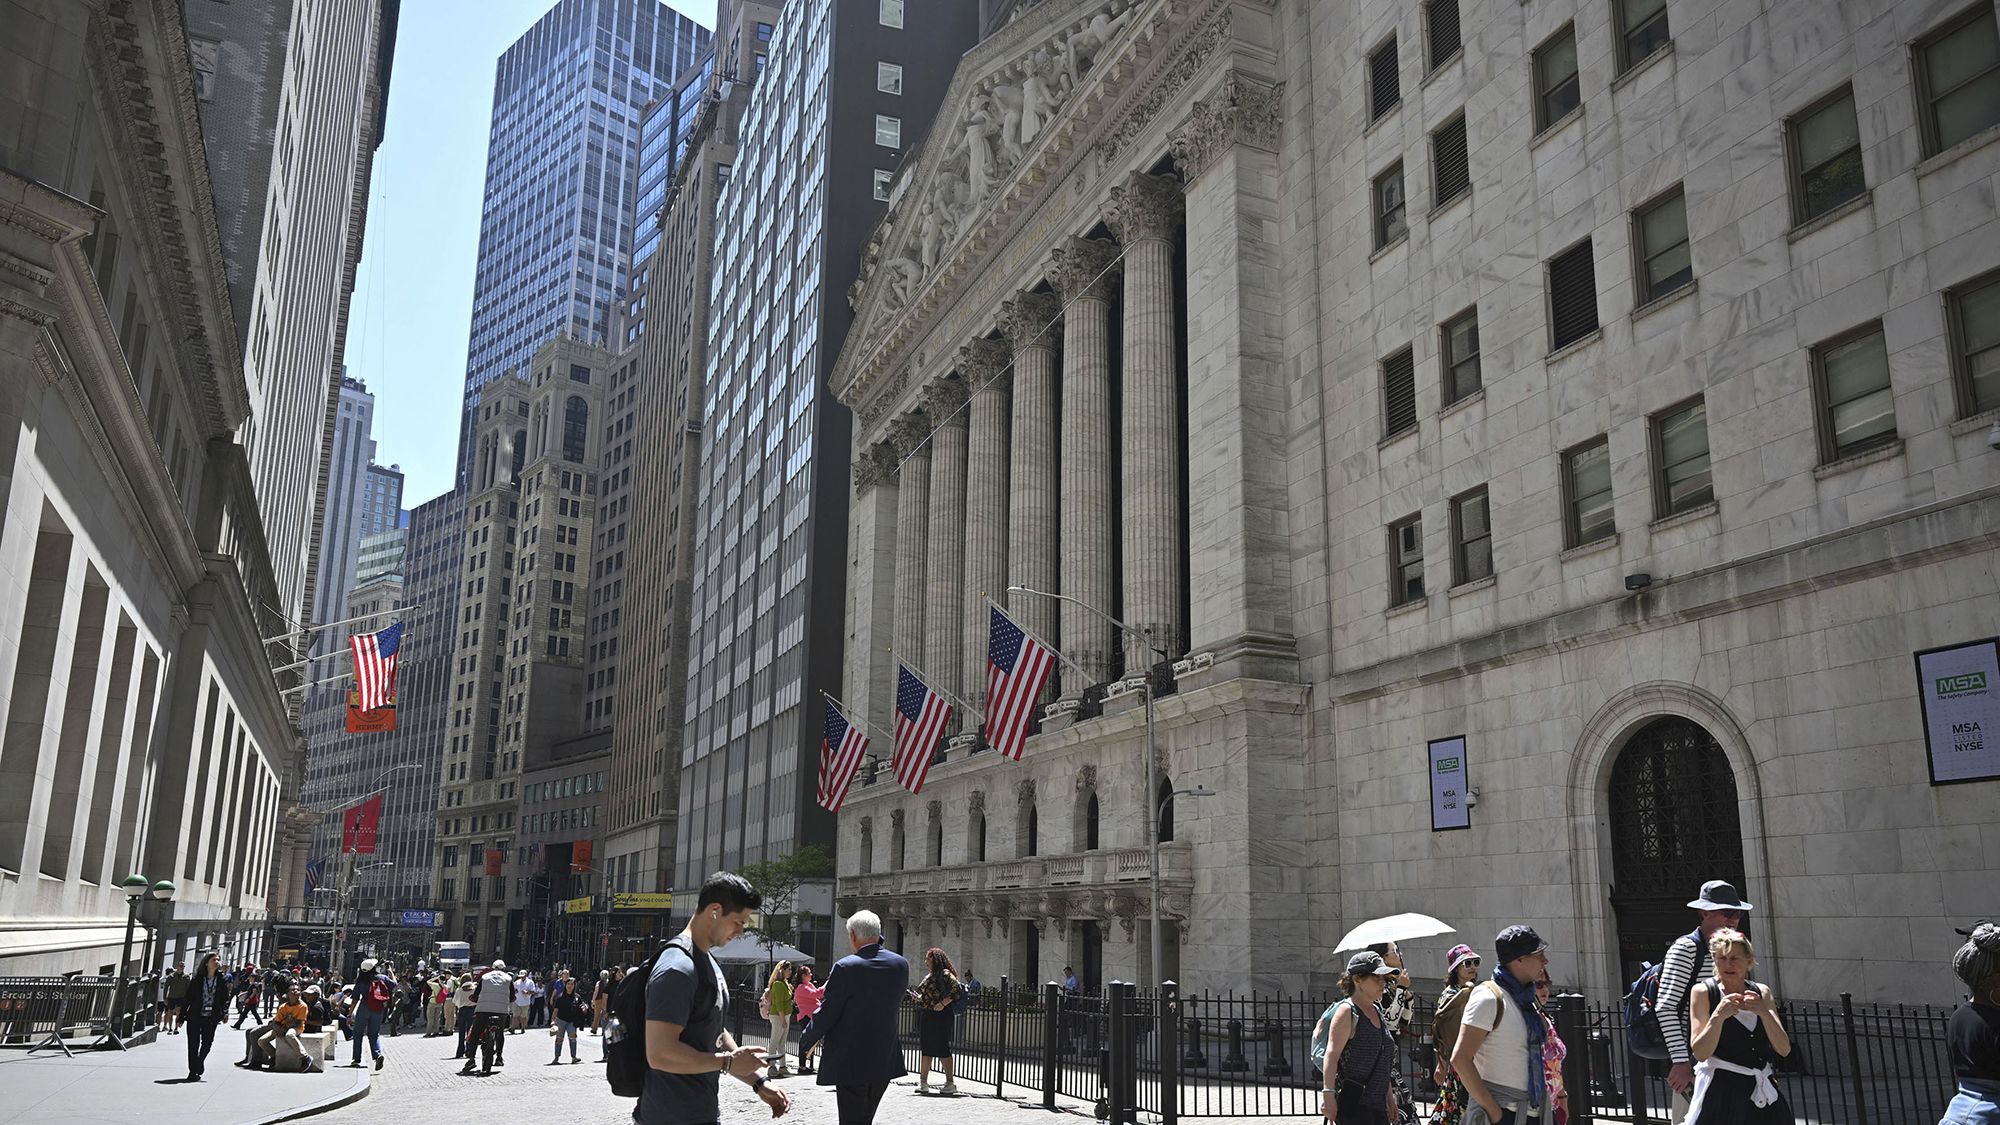 The New York Stock Exchange said Monday's technical issue is related to a mechanism designed to prevent stock prices from swinging wildly.